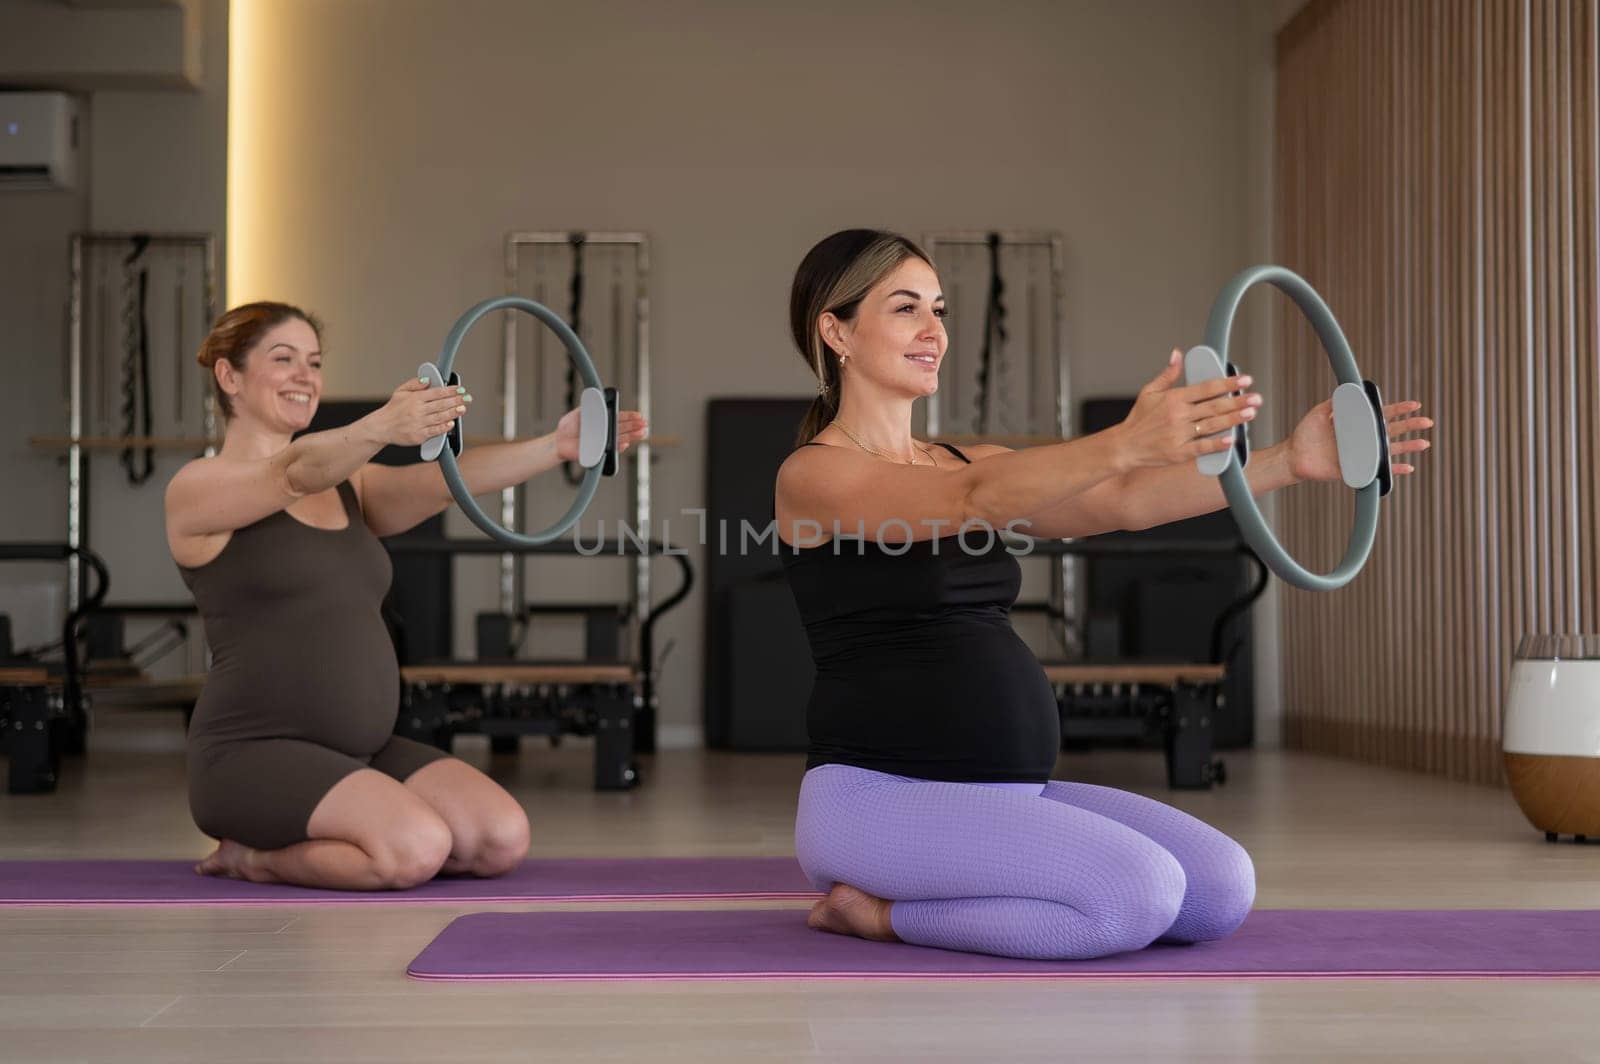 Two pregnant women doing yoga. Exercises with a gymnastic circle for Pilates